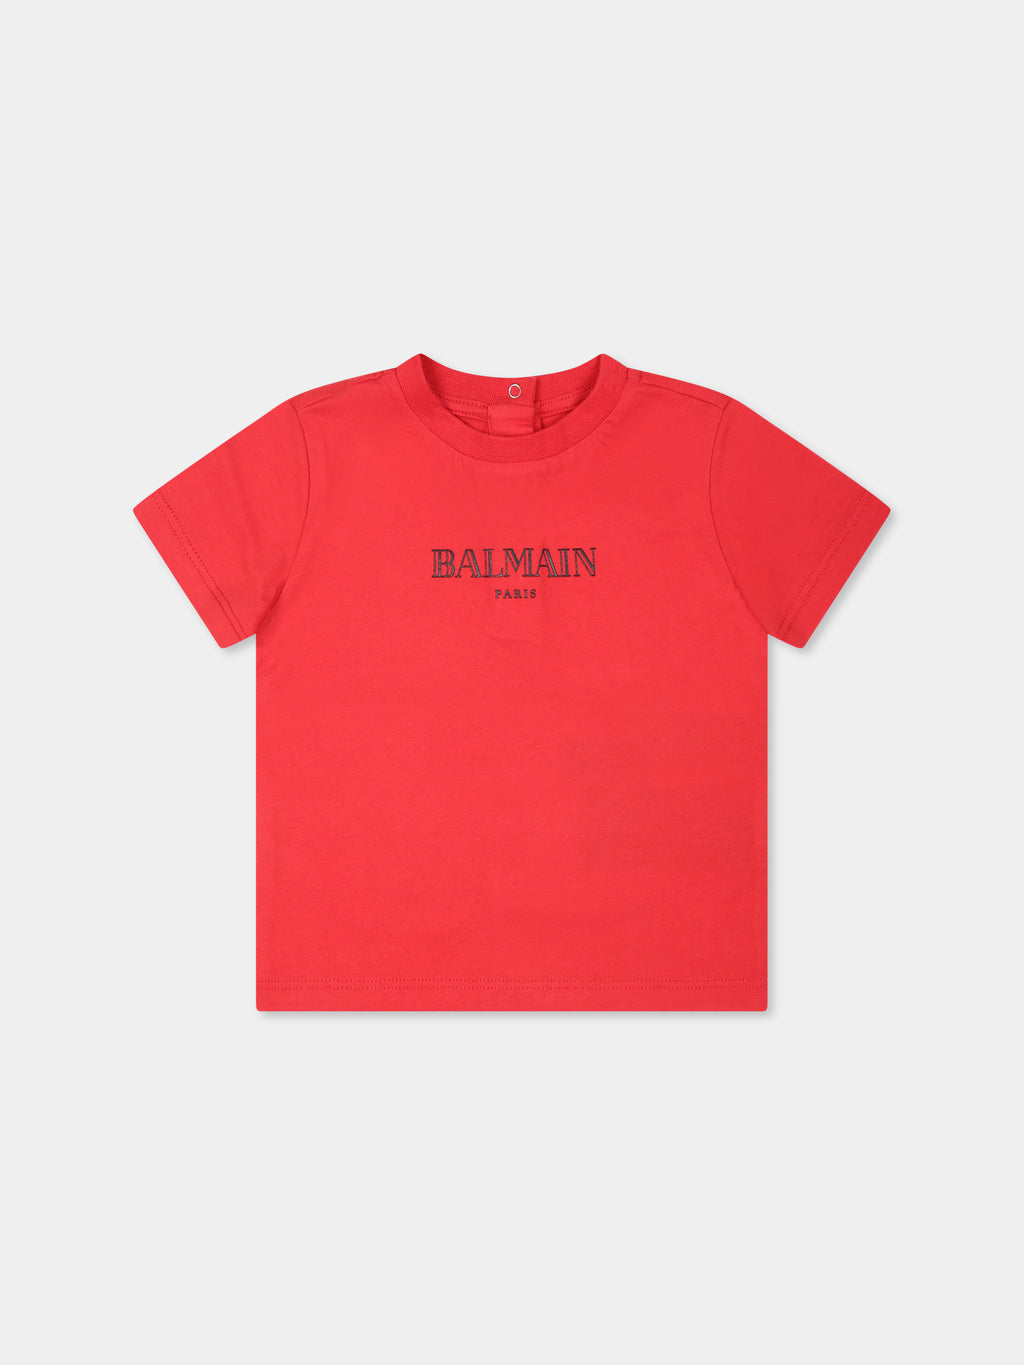 Red t-shirt for babykids with logo